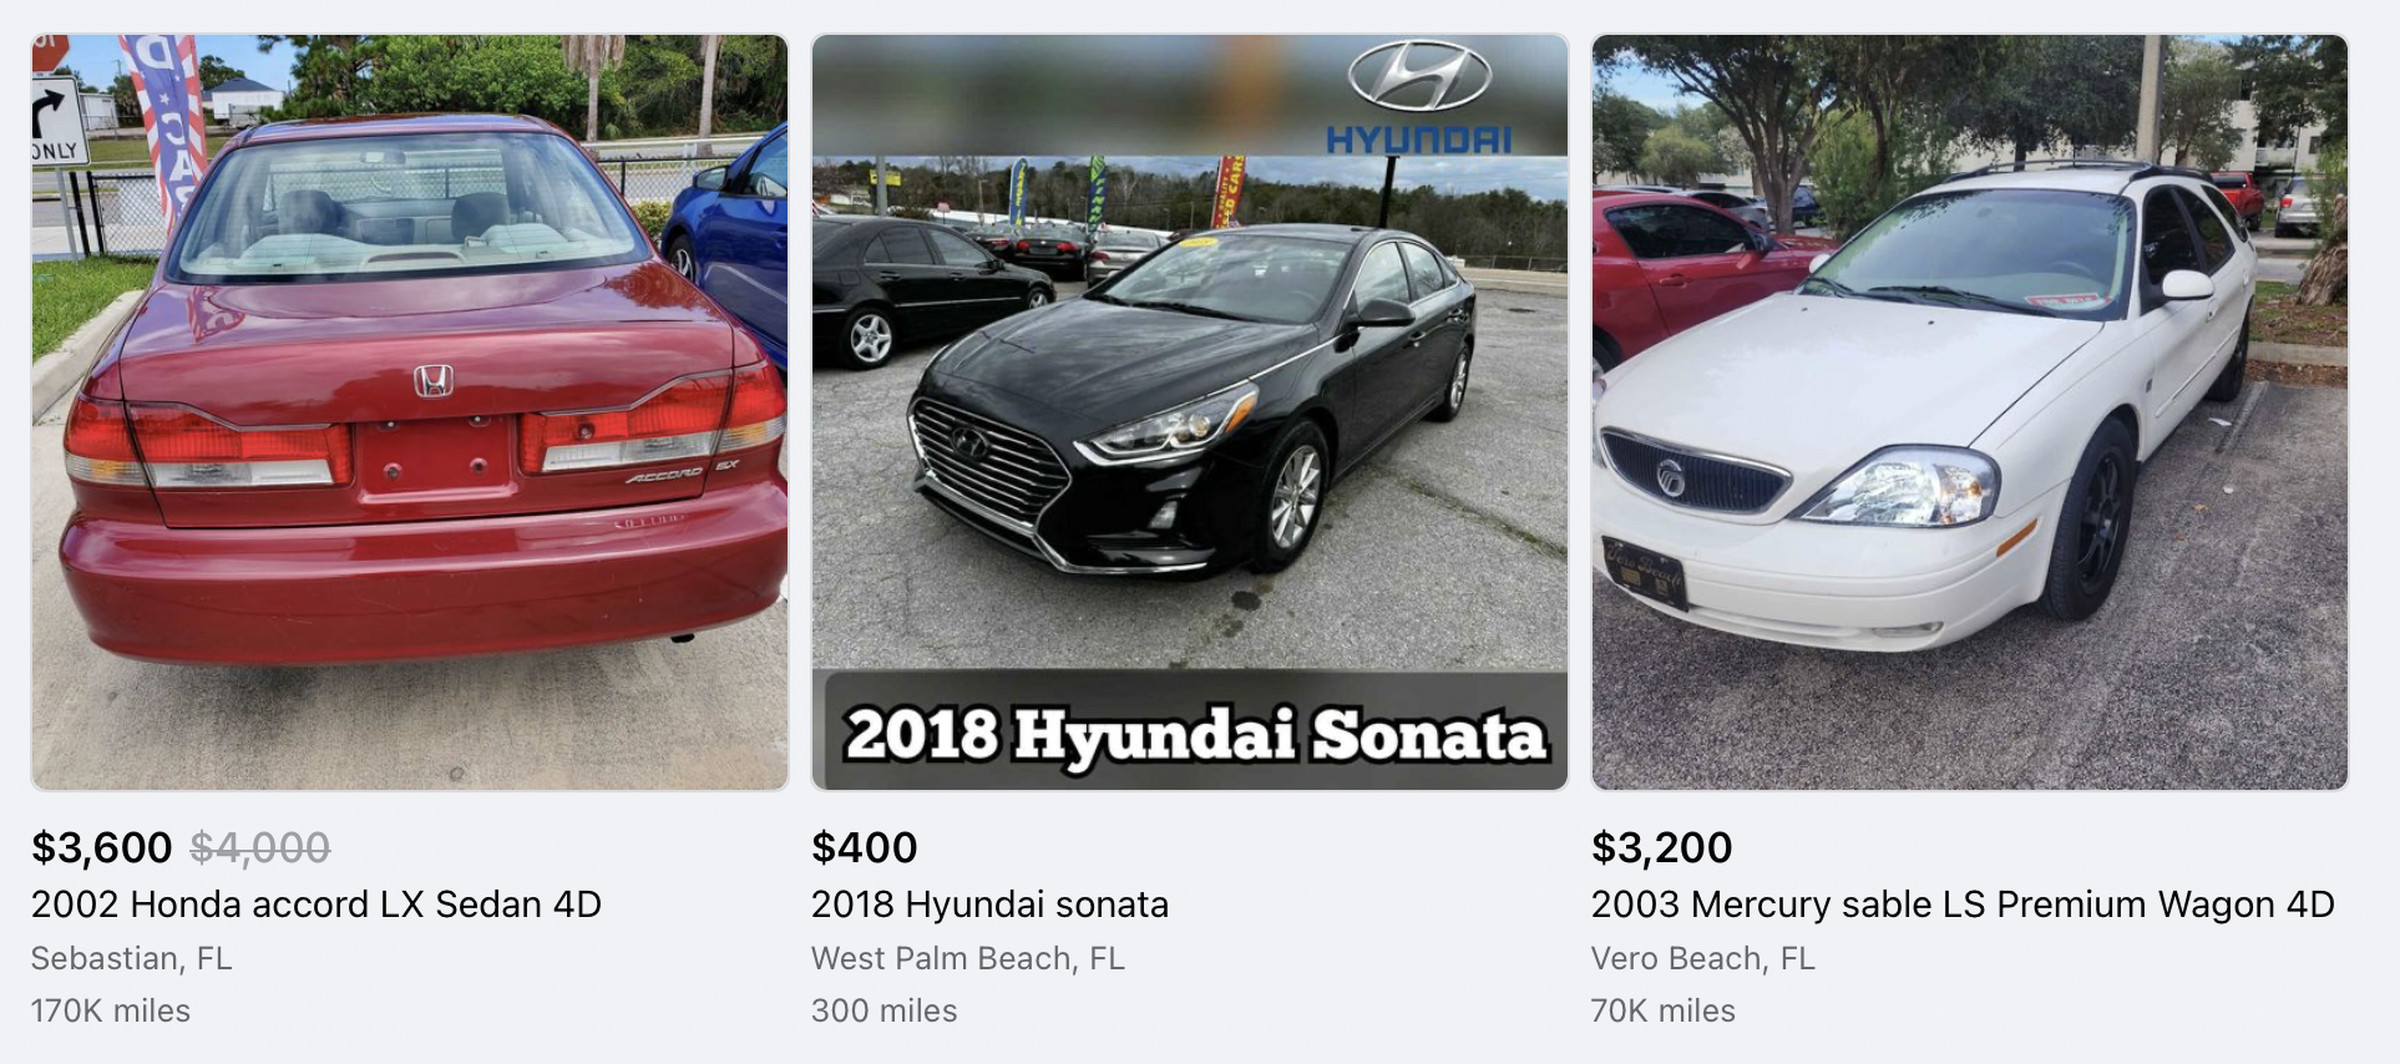 A screenshot from Facebook Marketplace showing a Hyundai Sonata for sale for $400 from a dealership